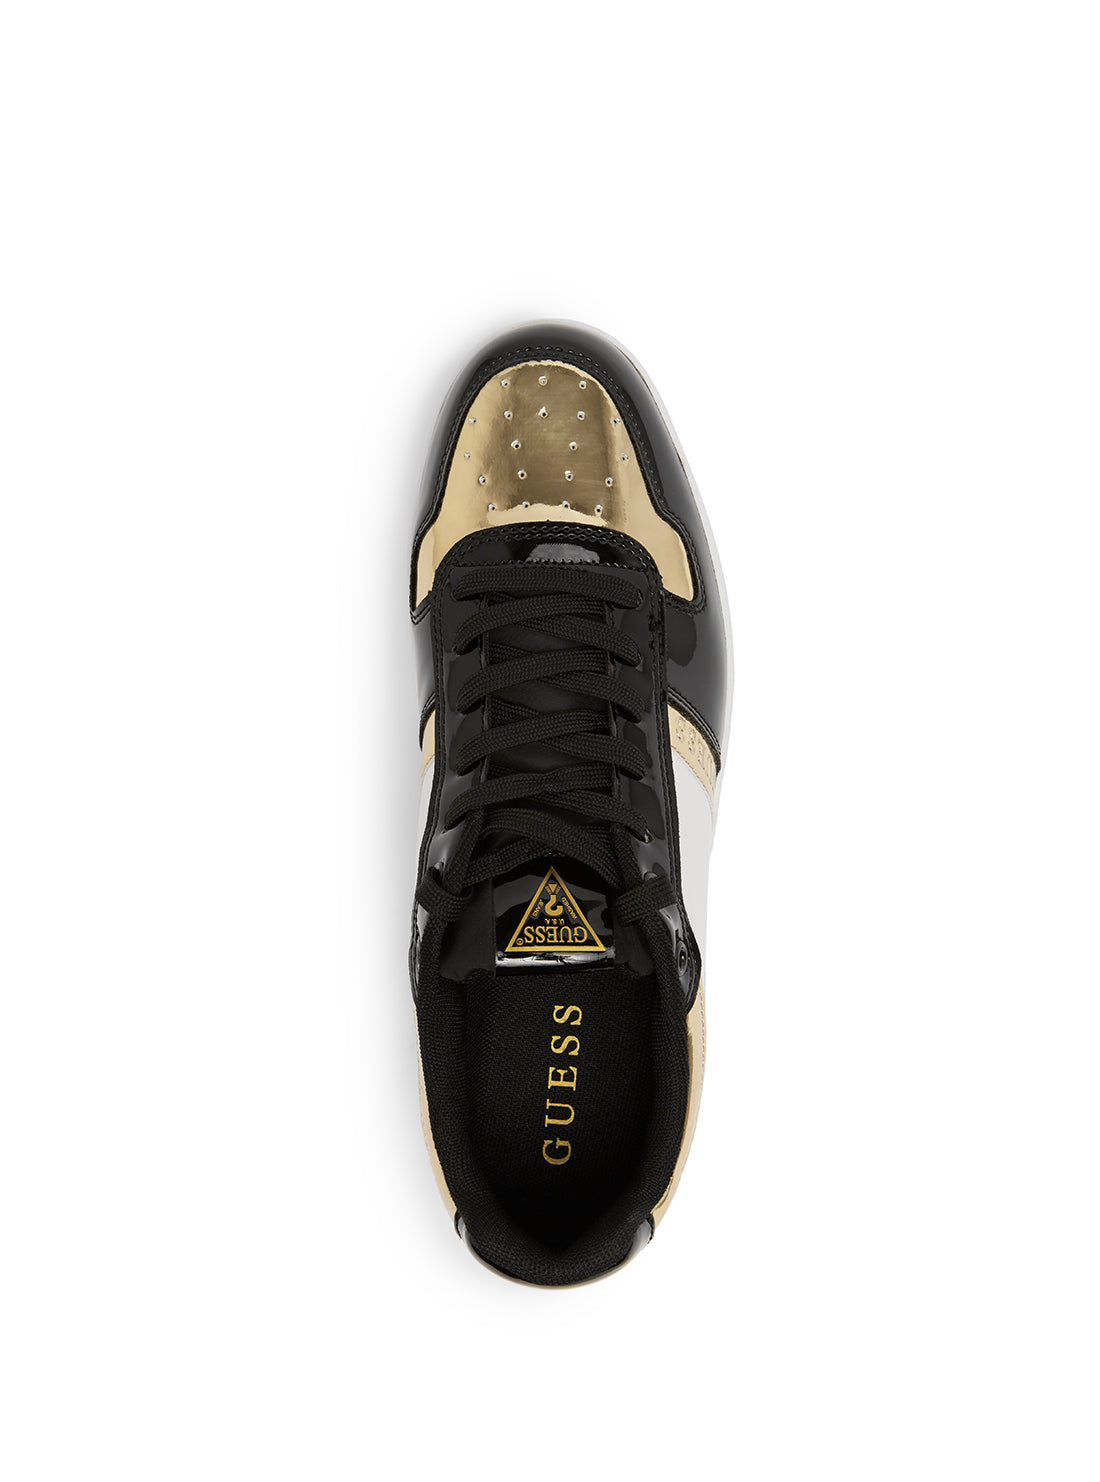 GUESS Men's Leazy Gold Low Top Sneakers LEAZY Top View